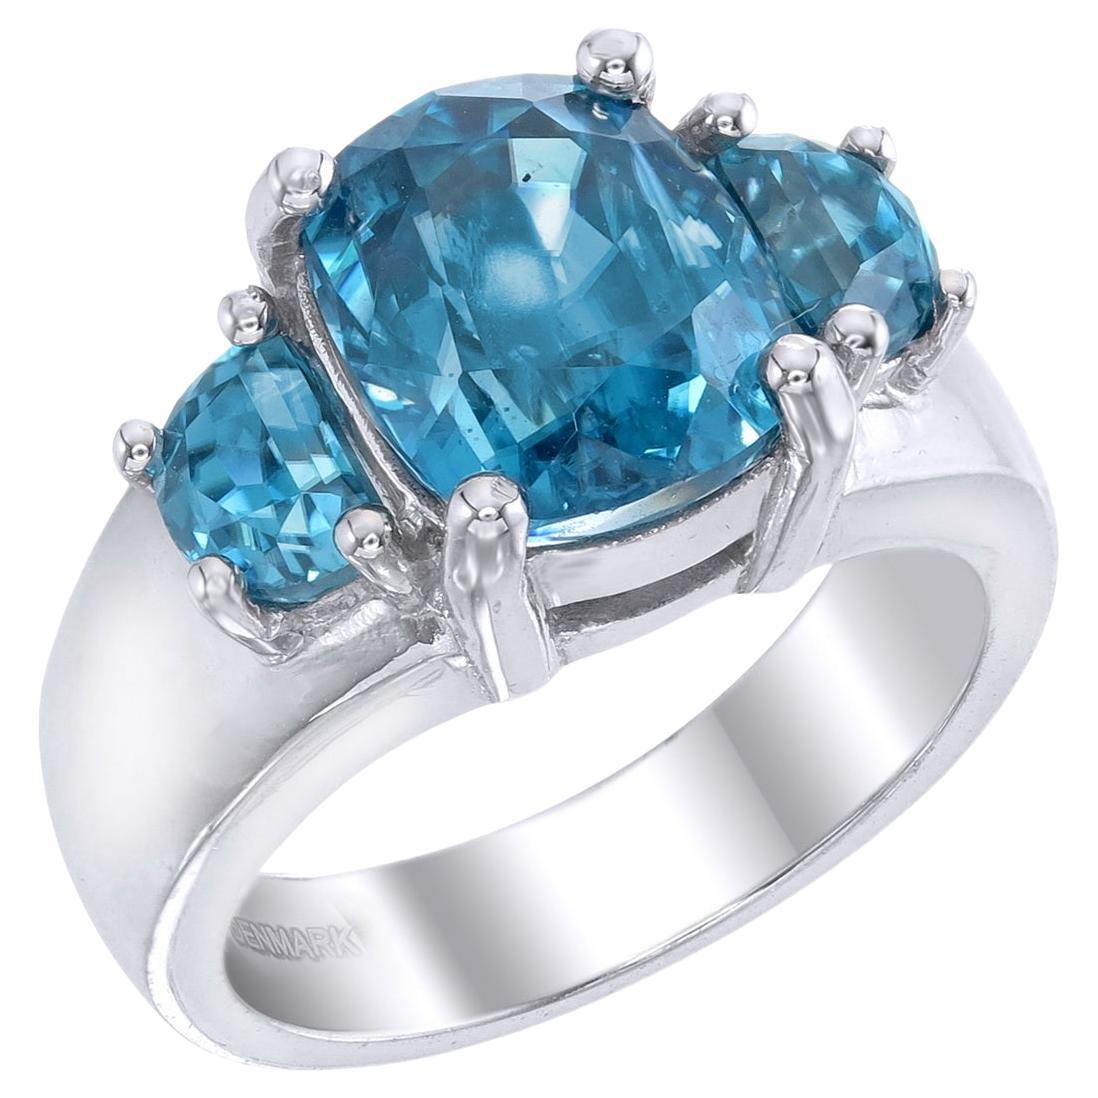 Orloff of Denmark, 7.83 ct Blue Zircon Three-Stone Ring set in Sterling Silver For Sale